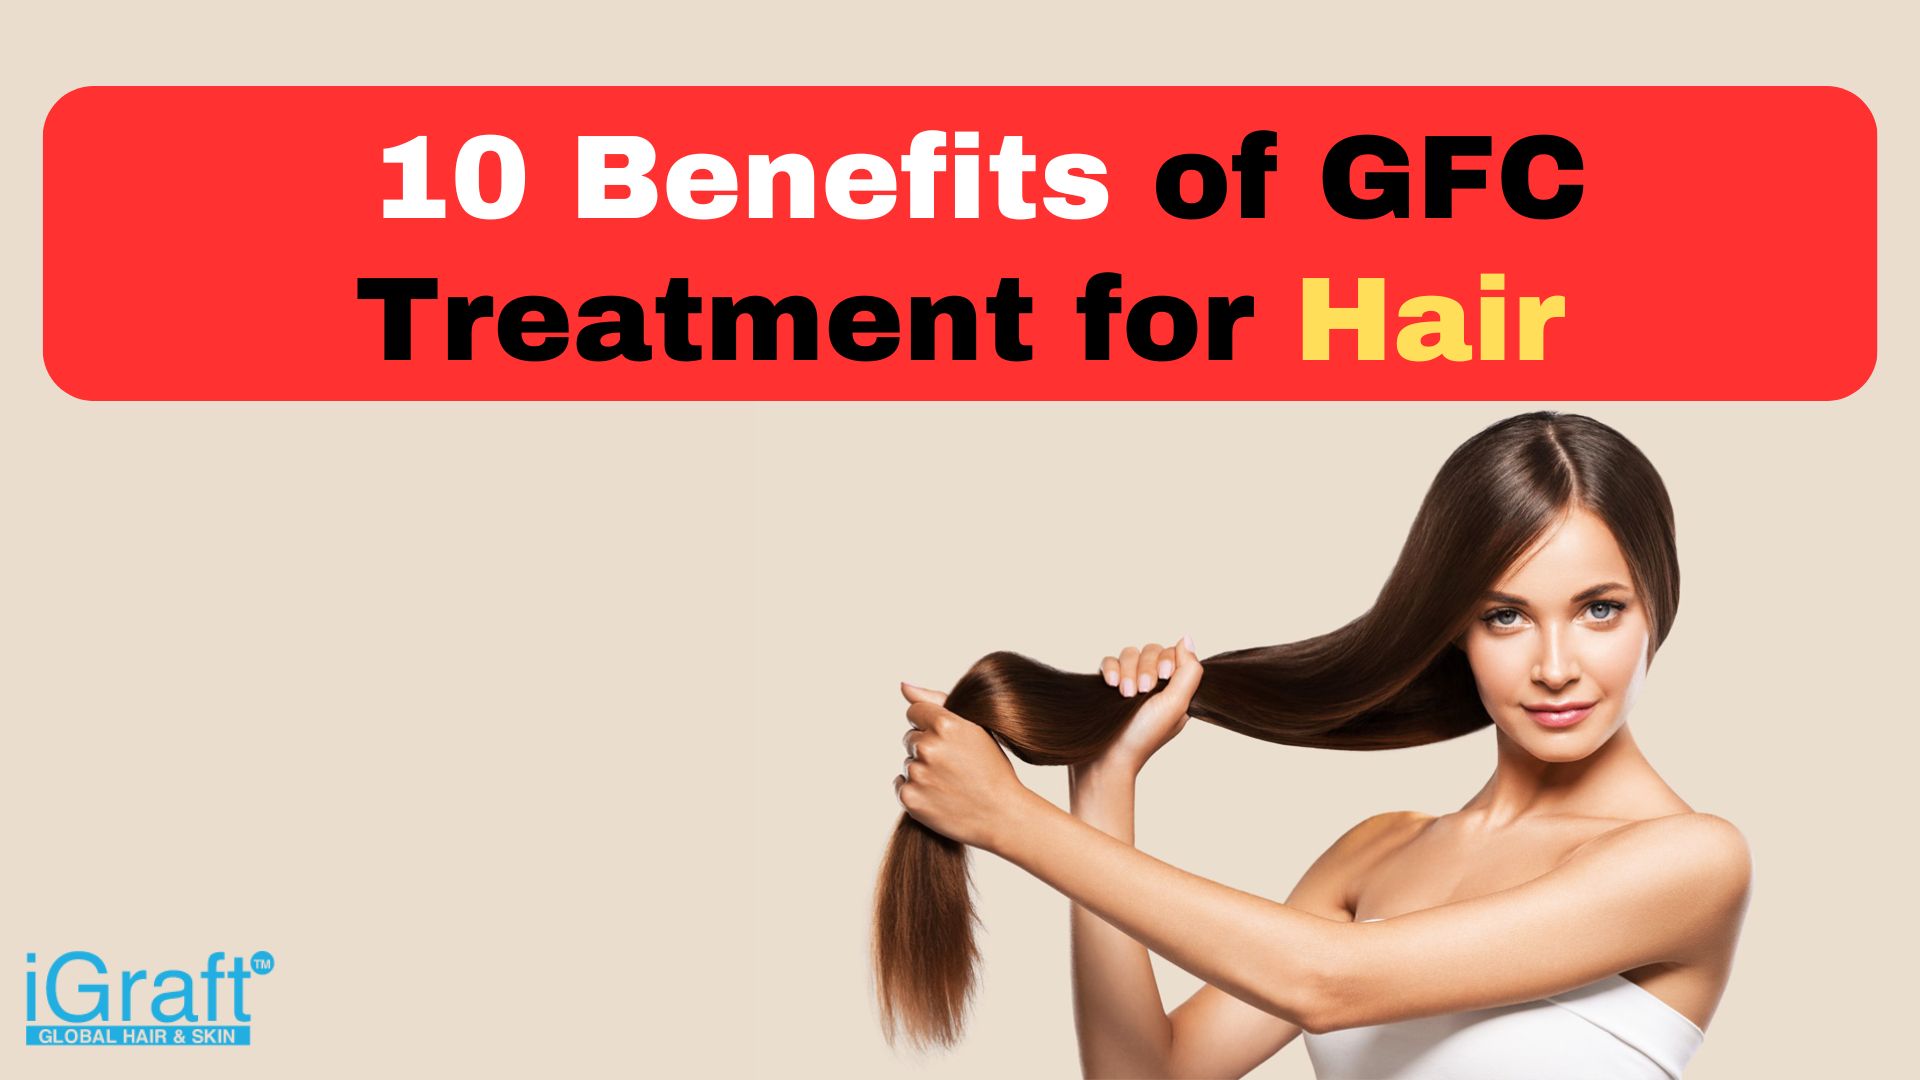 Benefits of 10 Benefits of GFC Treatment for Hair